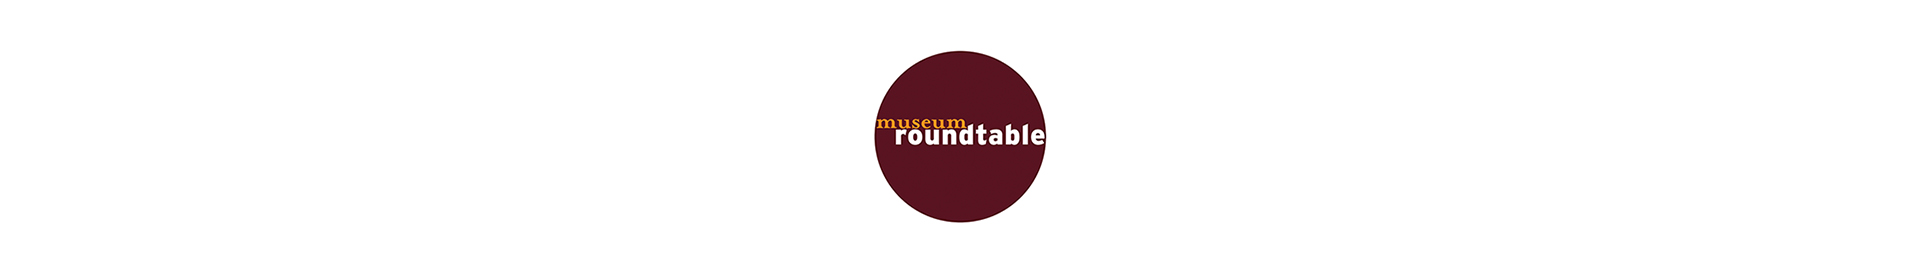 museum-roundtable-banner